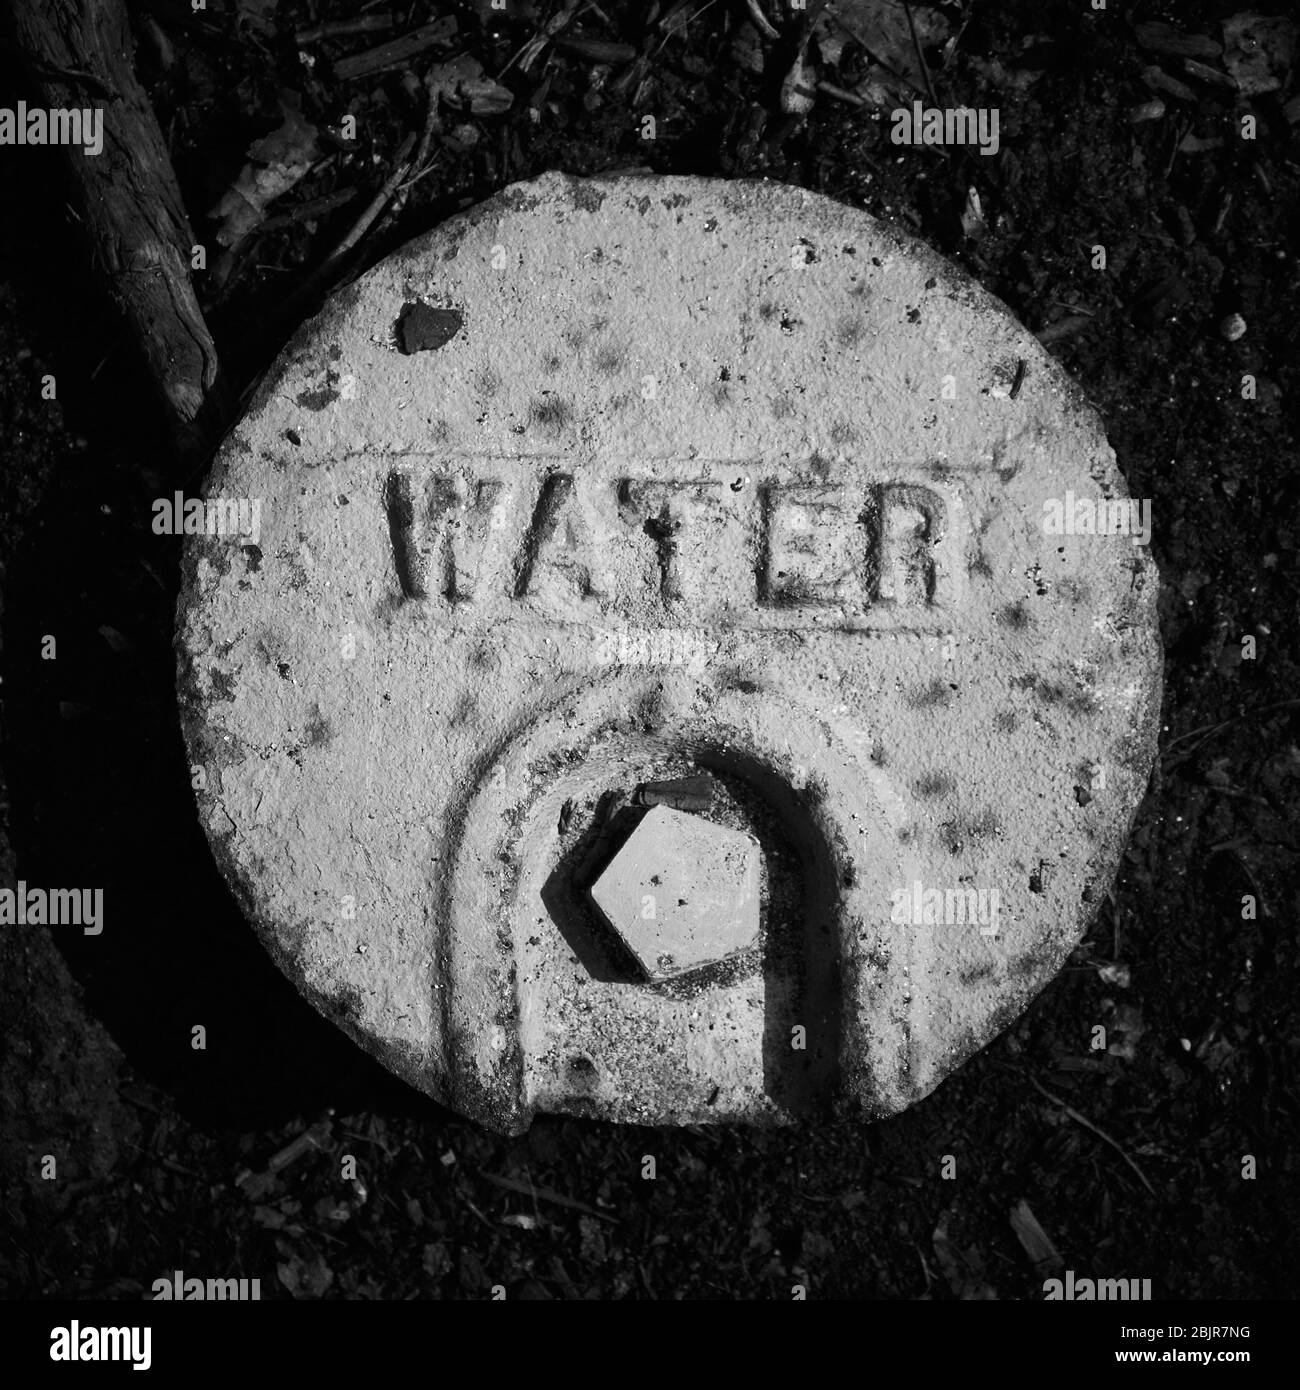 B&W photo of round cover of municipal water supply to residential or commercial establishment, covering below ground shut off valve. Stock Photo